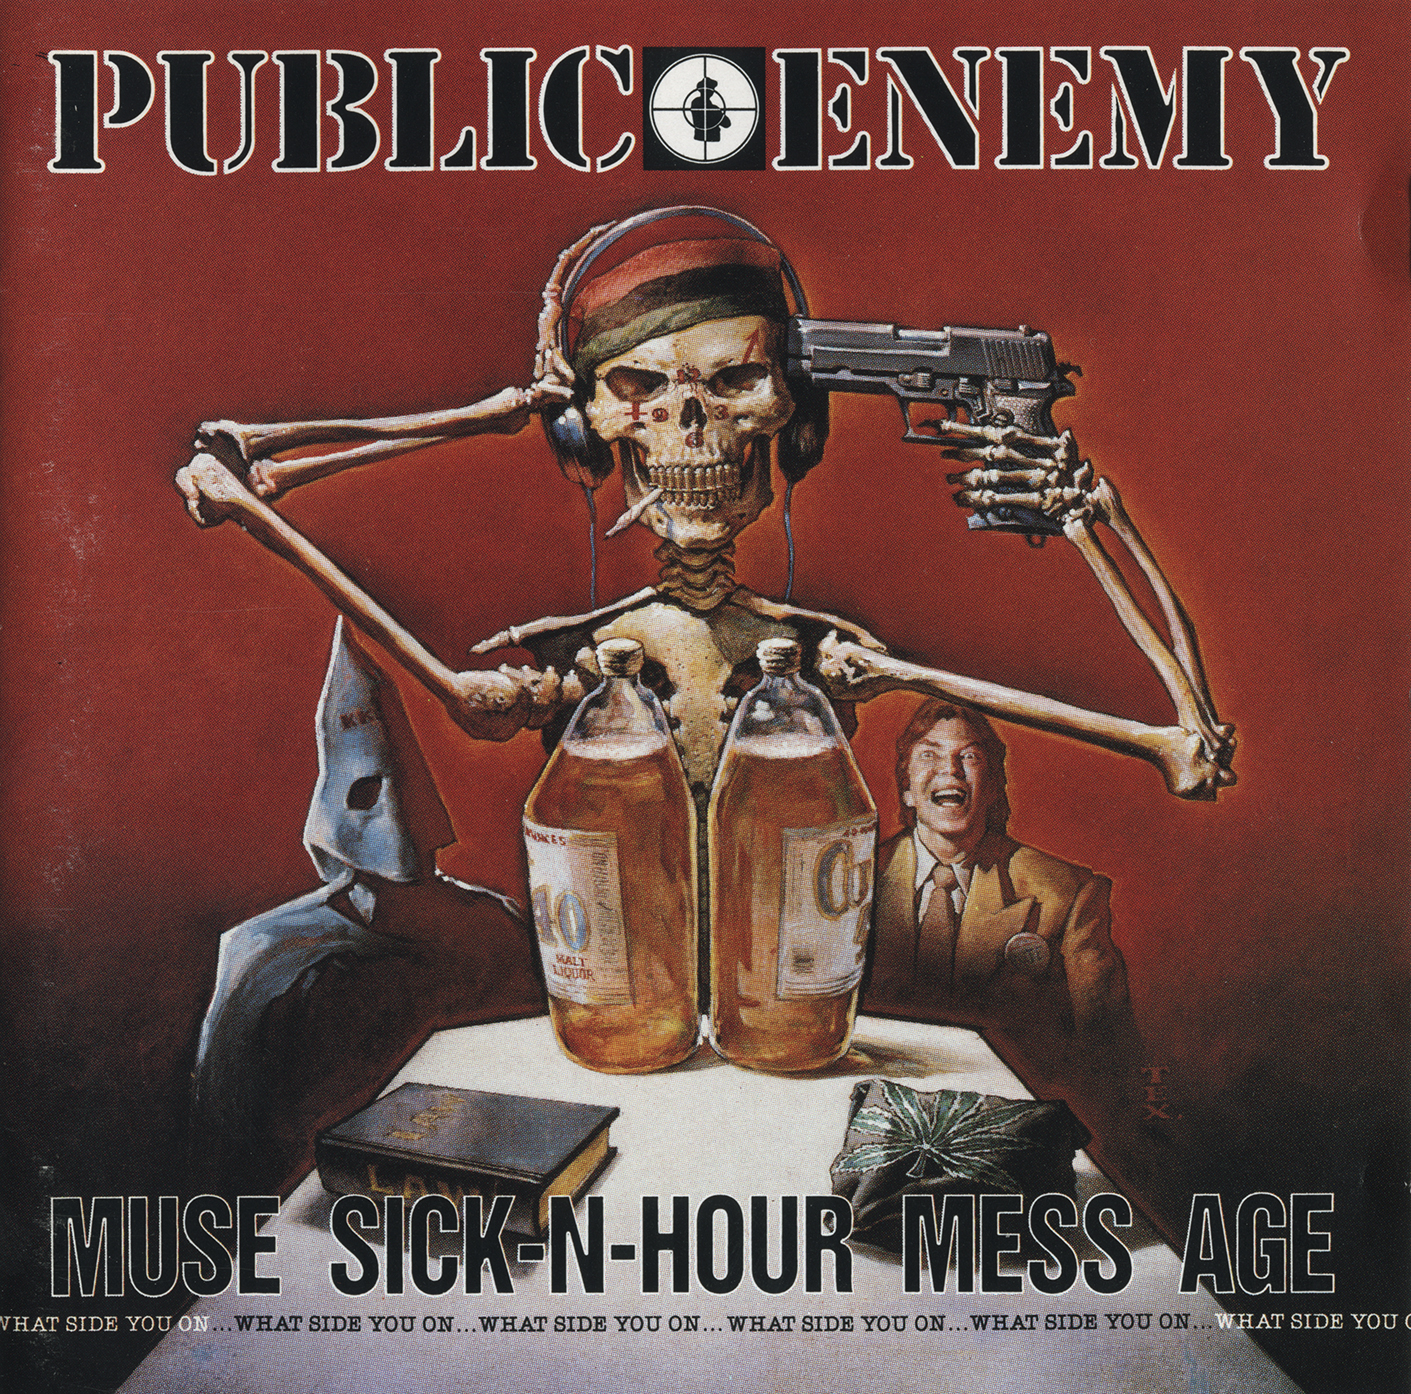 Art for So Whatcha Gone Do Now? by Public Enemy (Muse Sick '94)